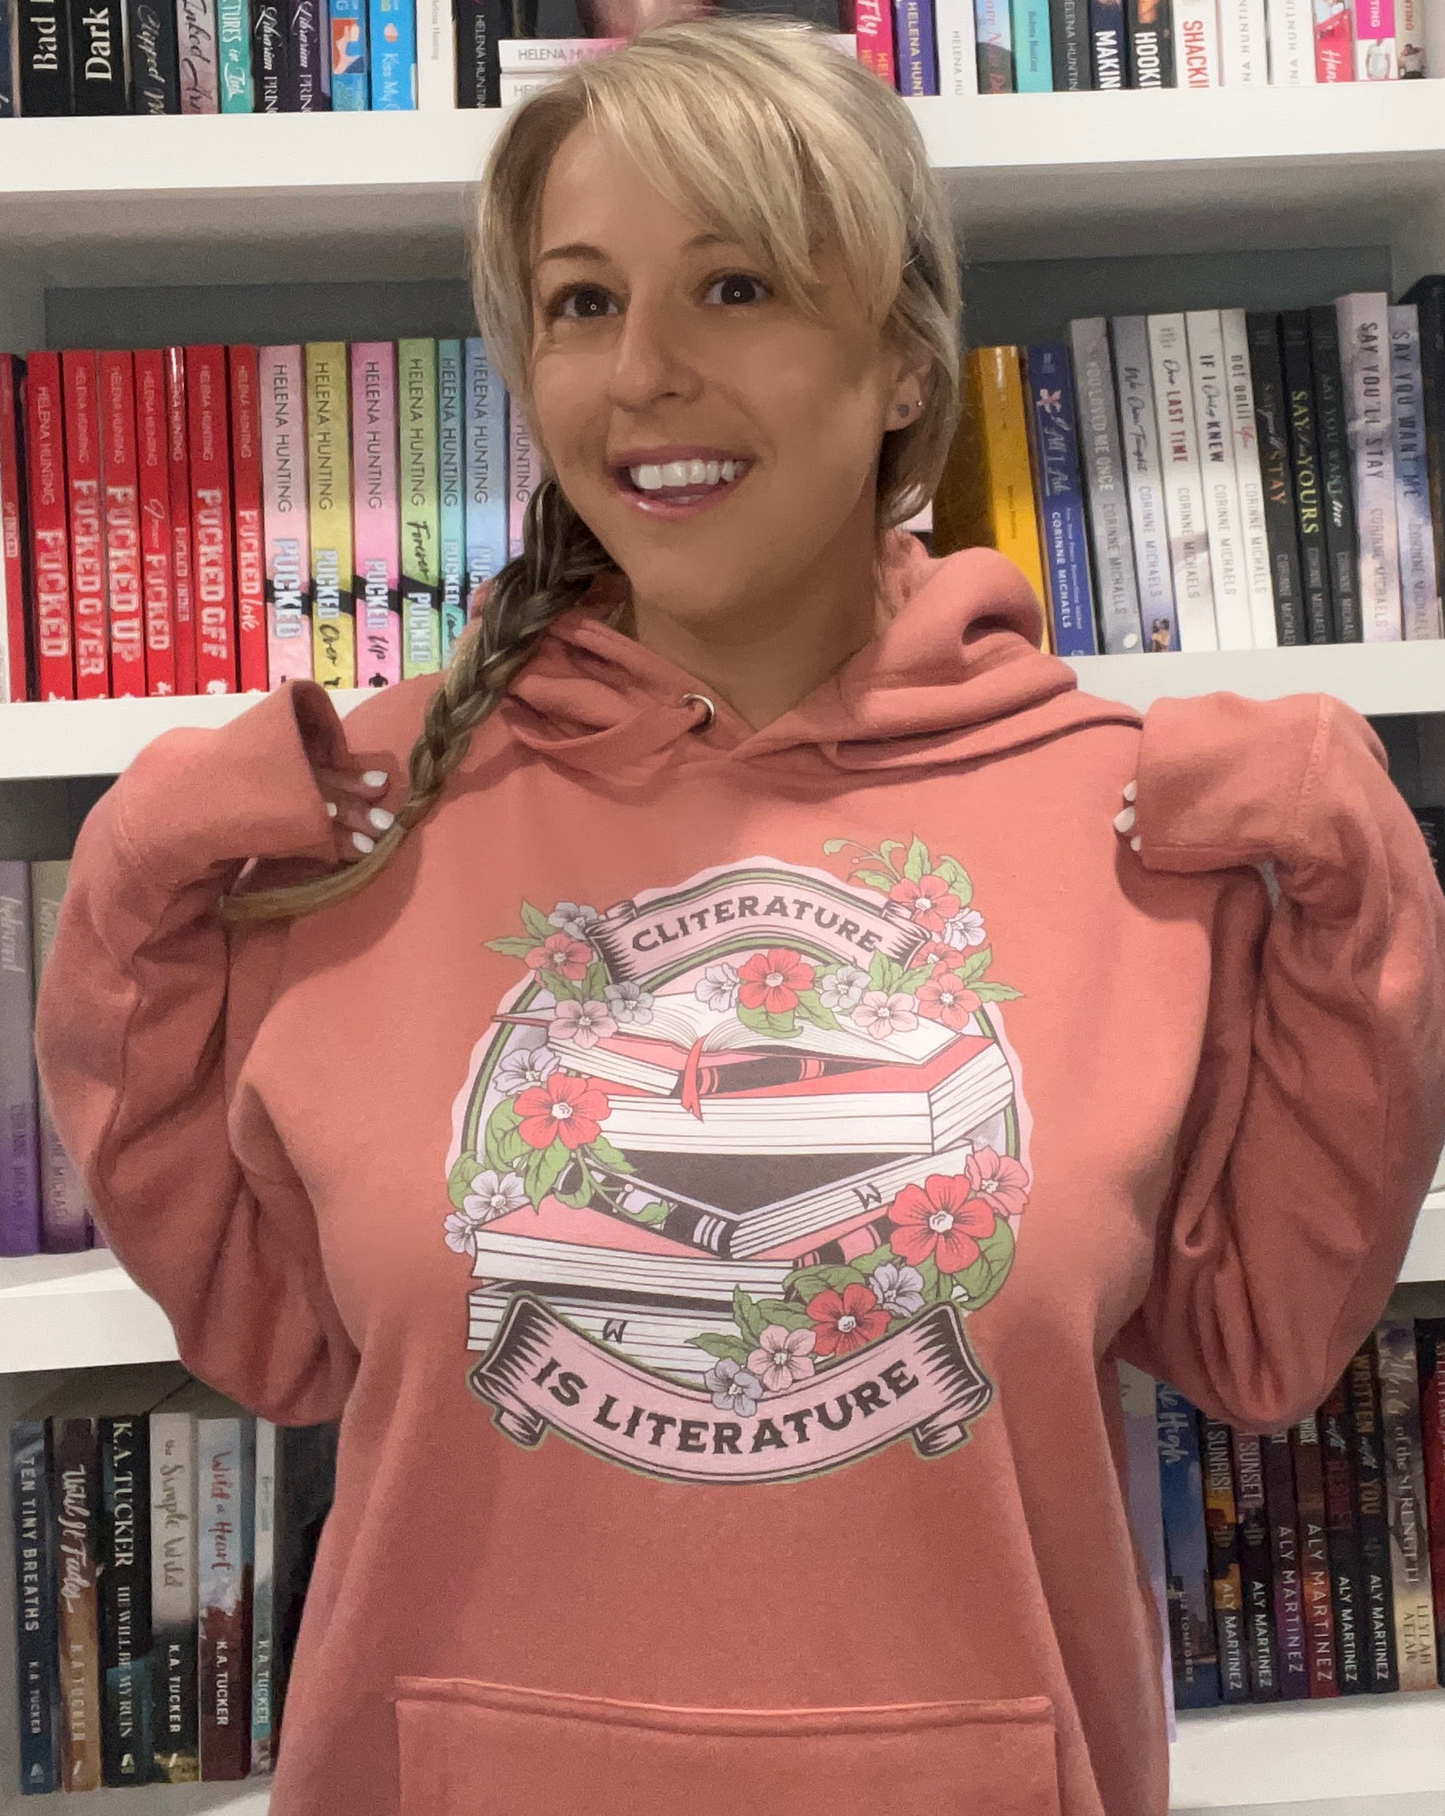 Cliterature is Literature Spring Bookstack Unisex Hoodie *NEW BRAND - CHECK SIZING* for FireDrake Artistry Photo by @samsbookstagram